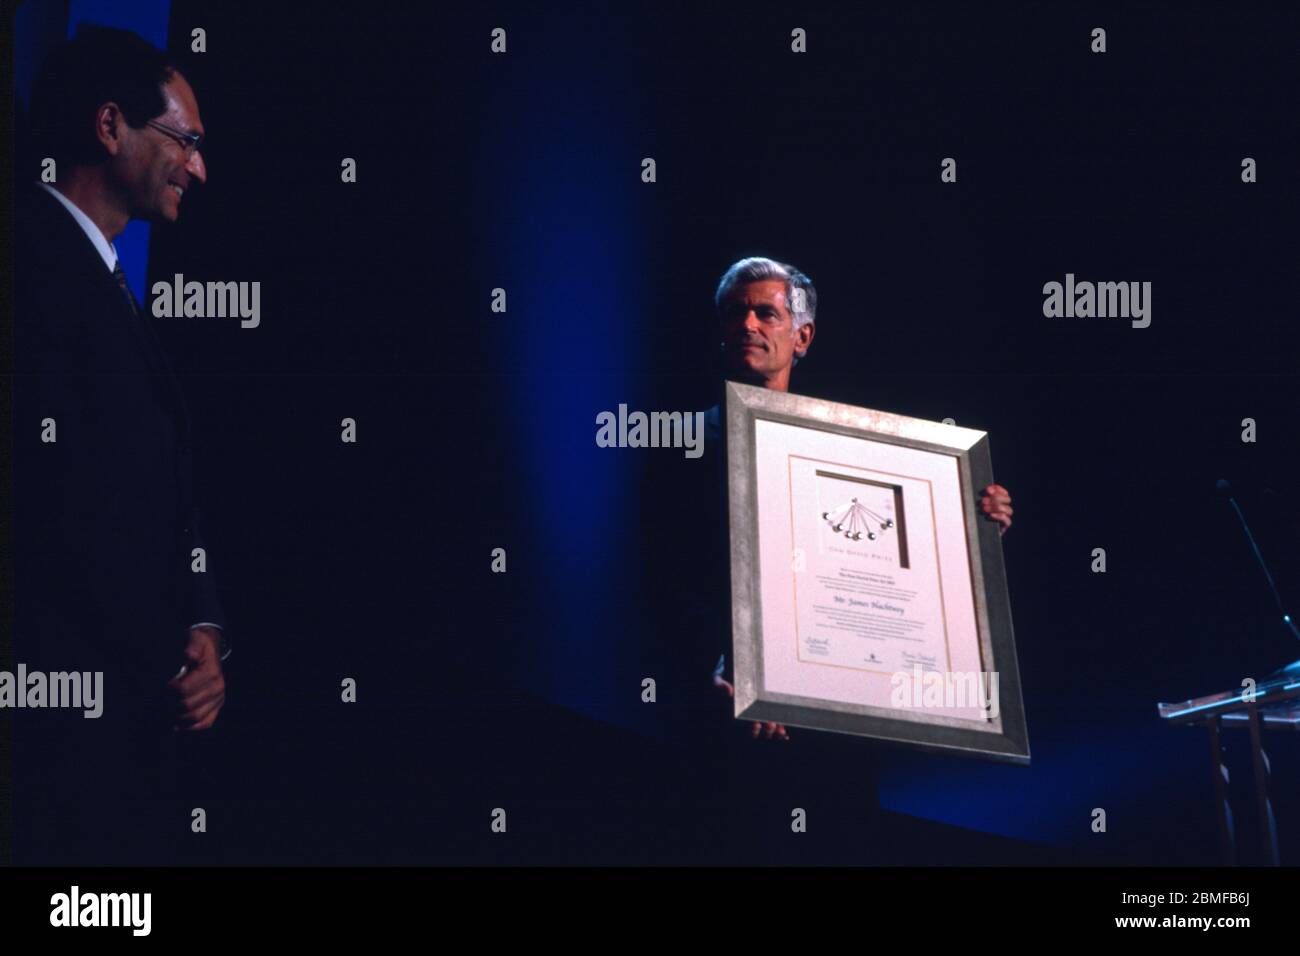 Israel, Tel Aviv 18th May 2003. American photojournalist and war photographer James Nachtwey holds a framed certificate of his Dan David award of US$1 million for the 'Present  Print & electronic media' theme received by Dan David  Foundation and Tel Aviv University during a presentation ceremony in Tel Aviv University, Israel. Stock Photo